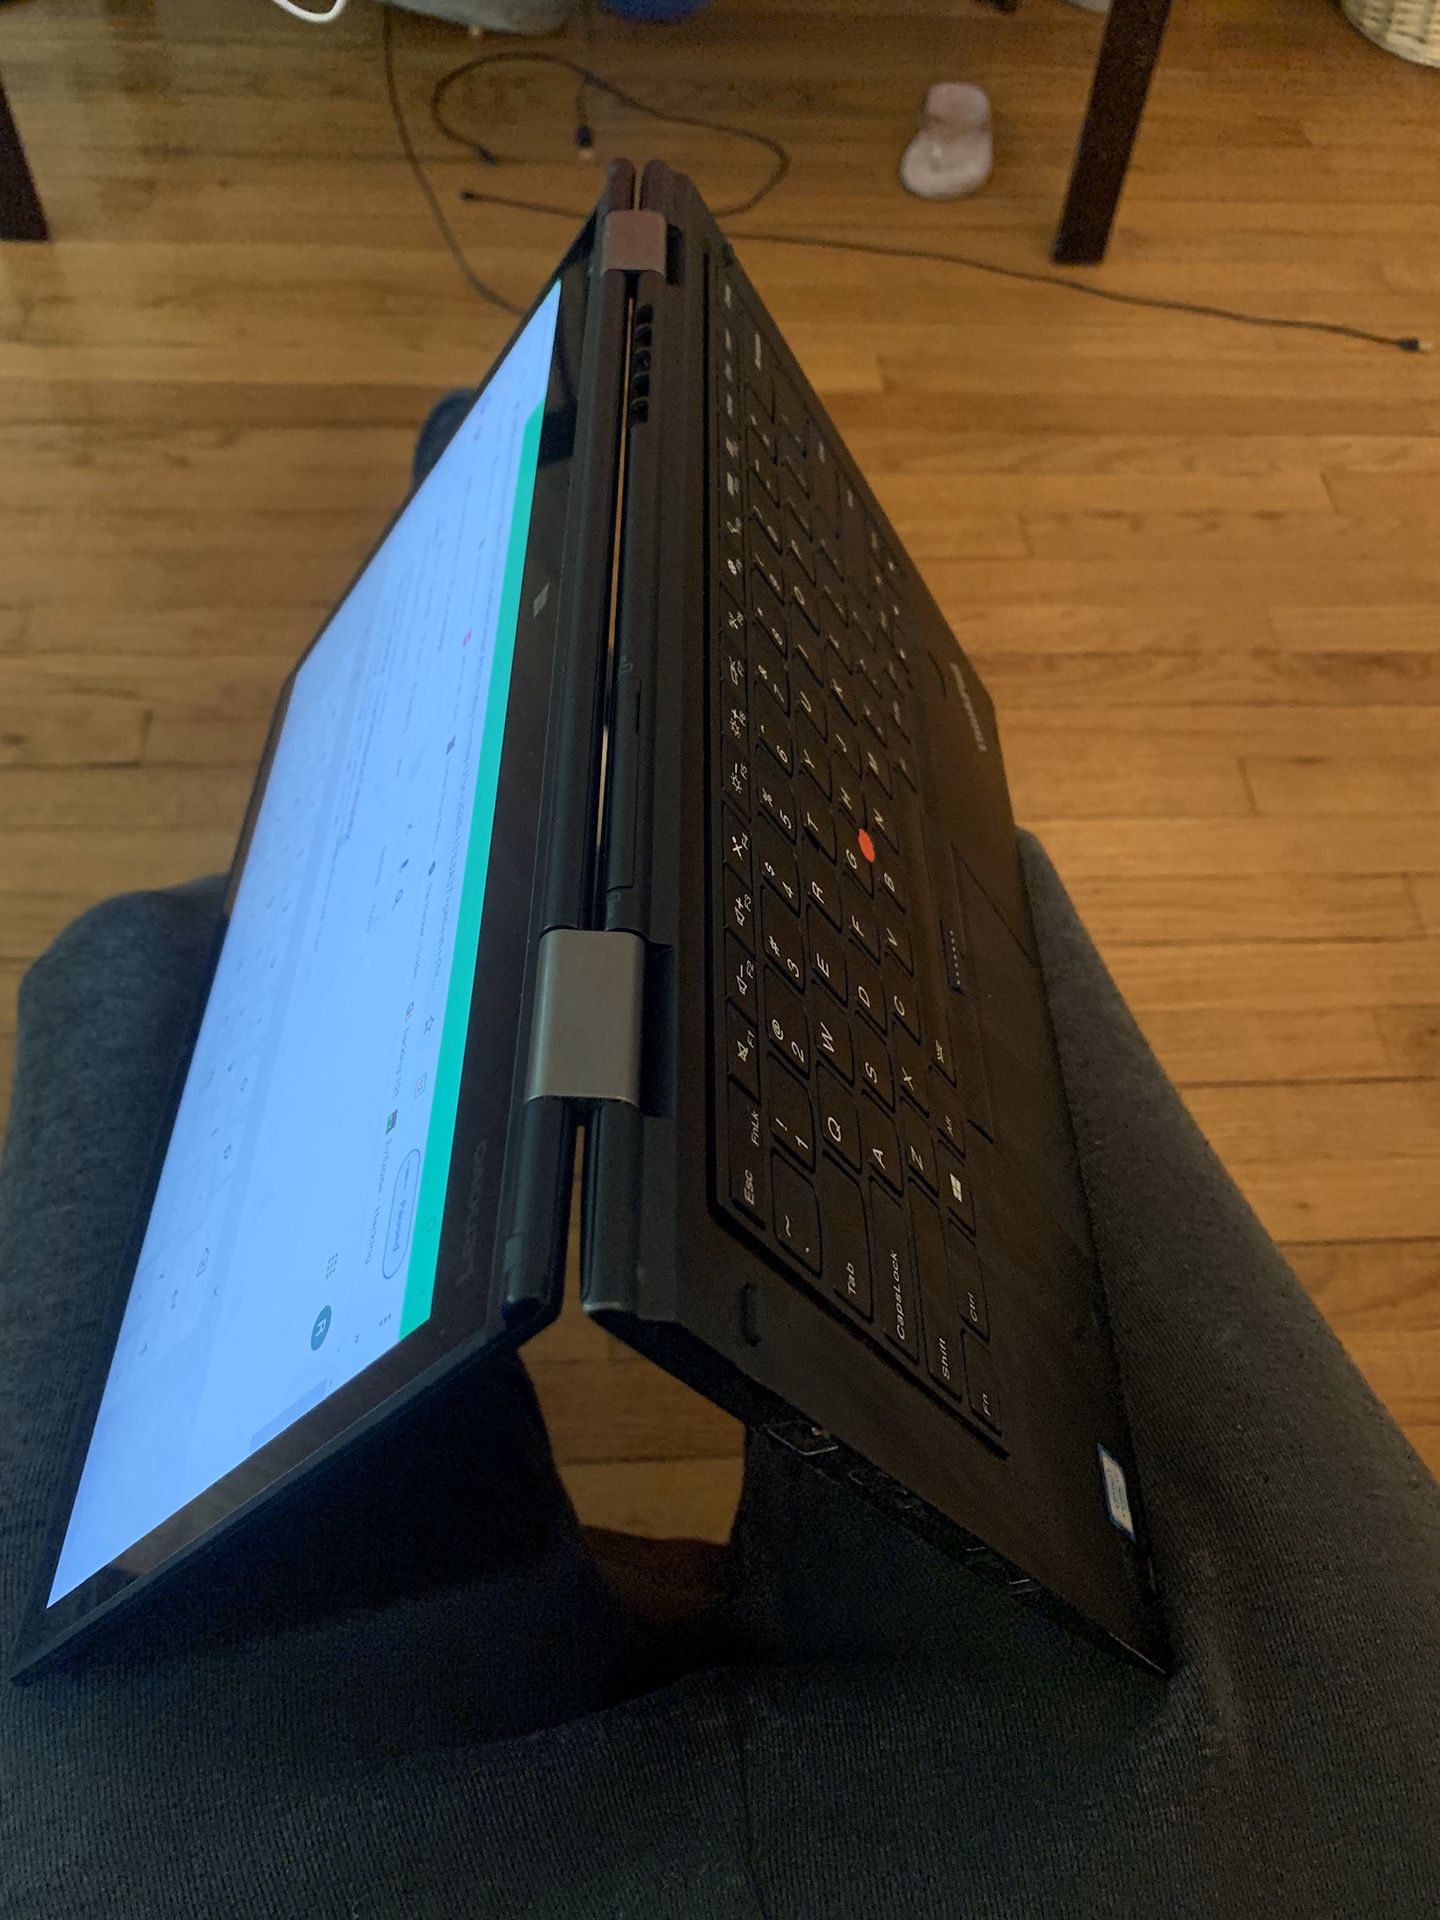 LENOVO X1 YOGA ($1,400 REFURBISHED. SEE PICTURES)